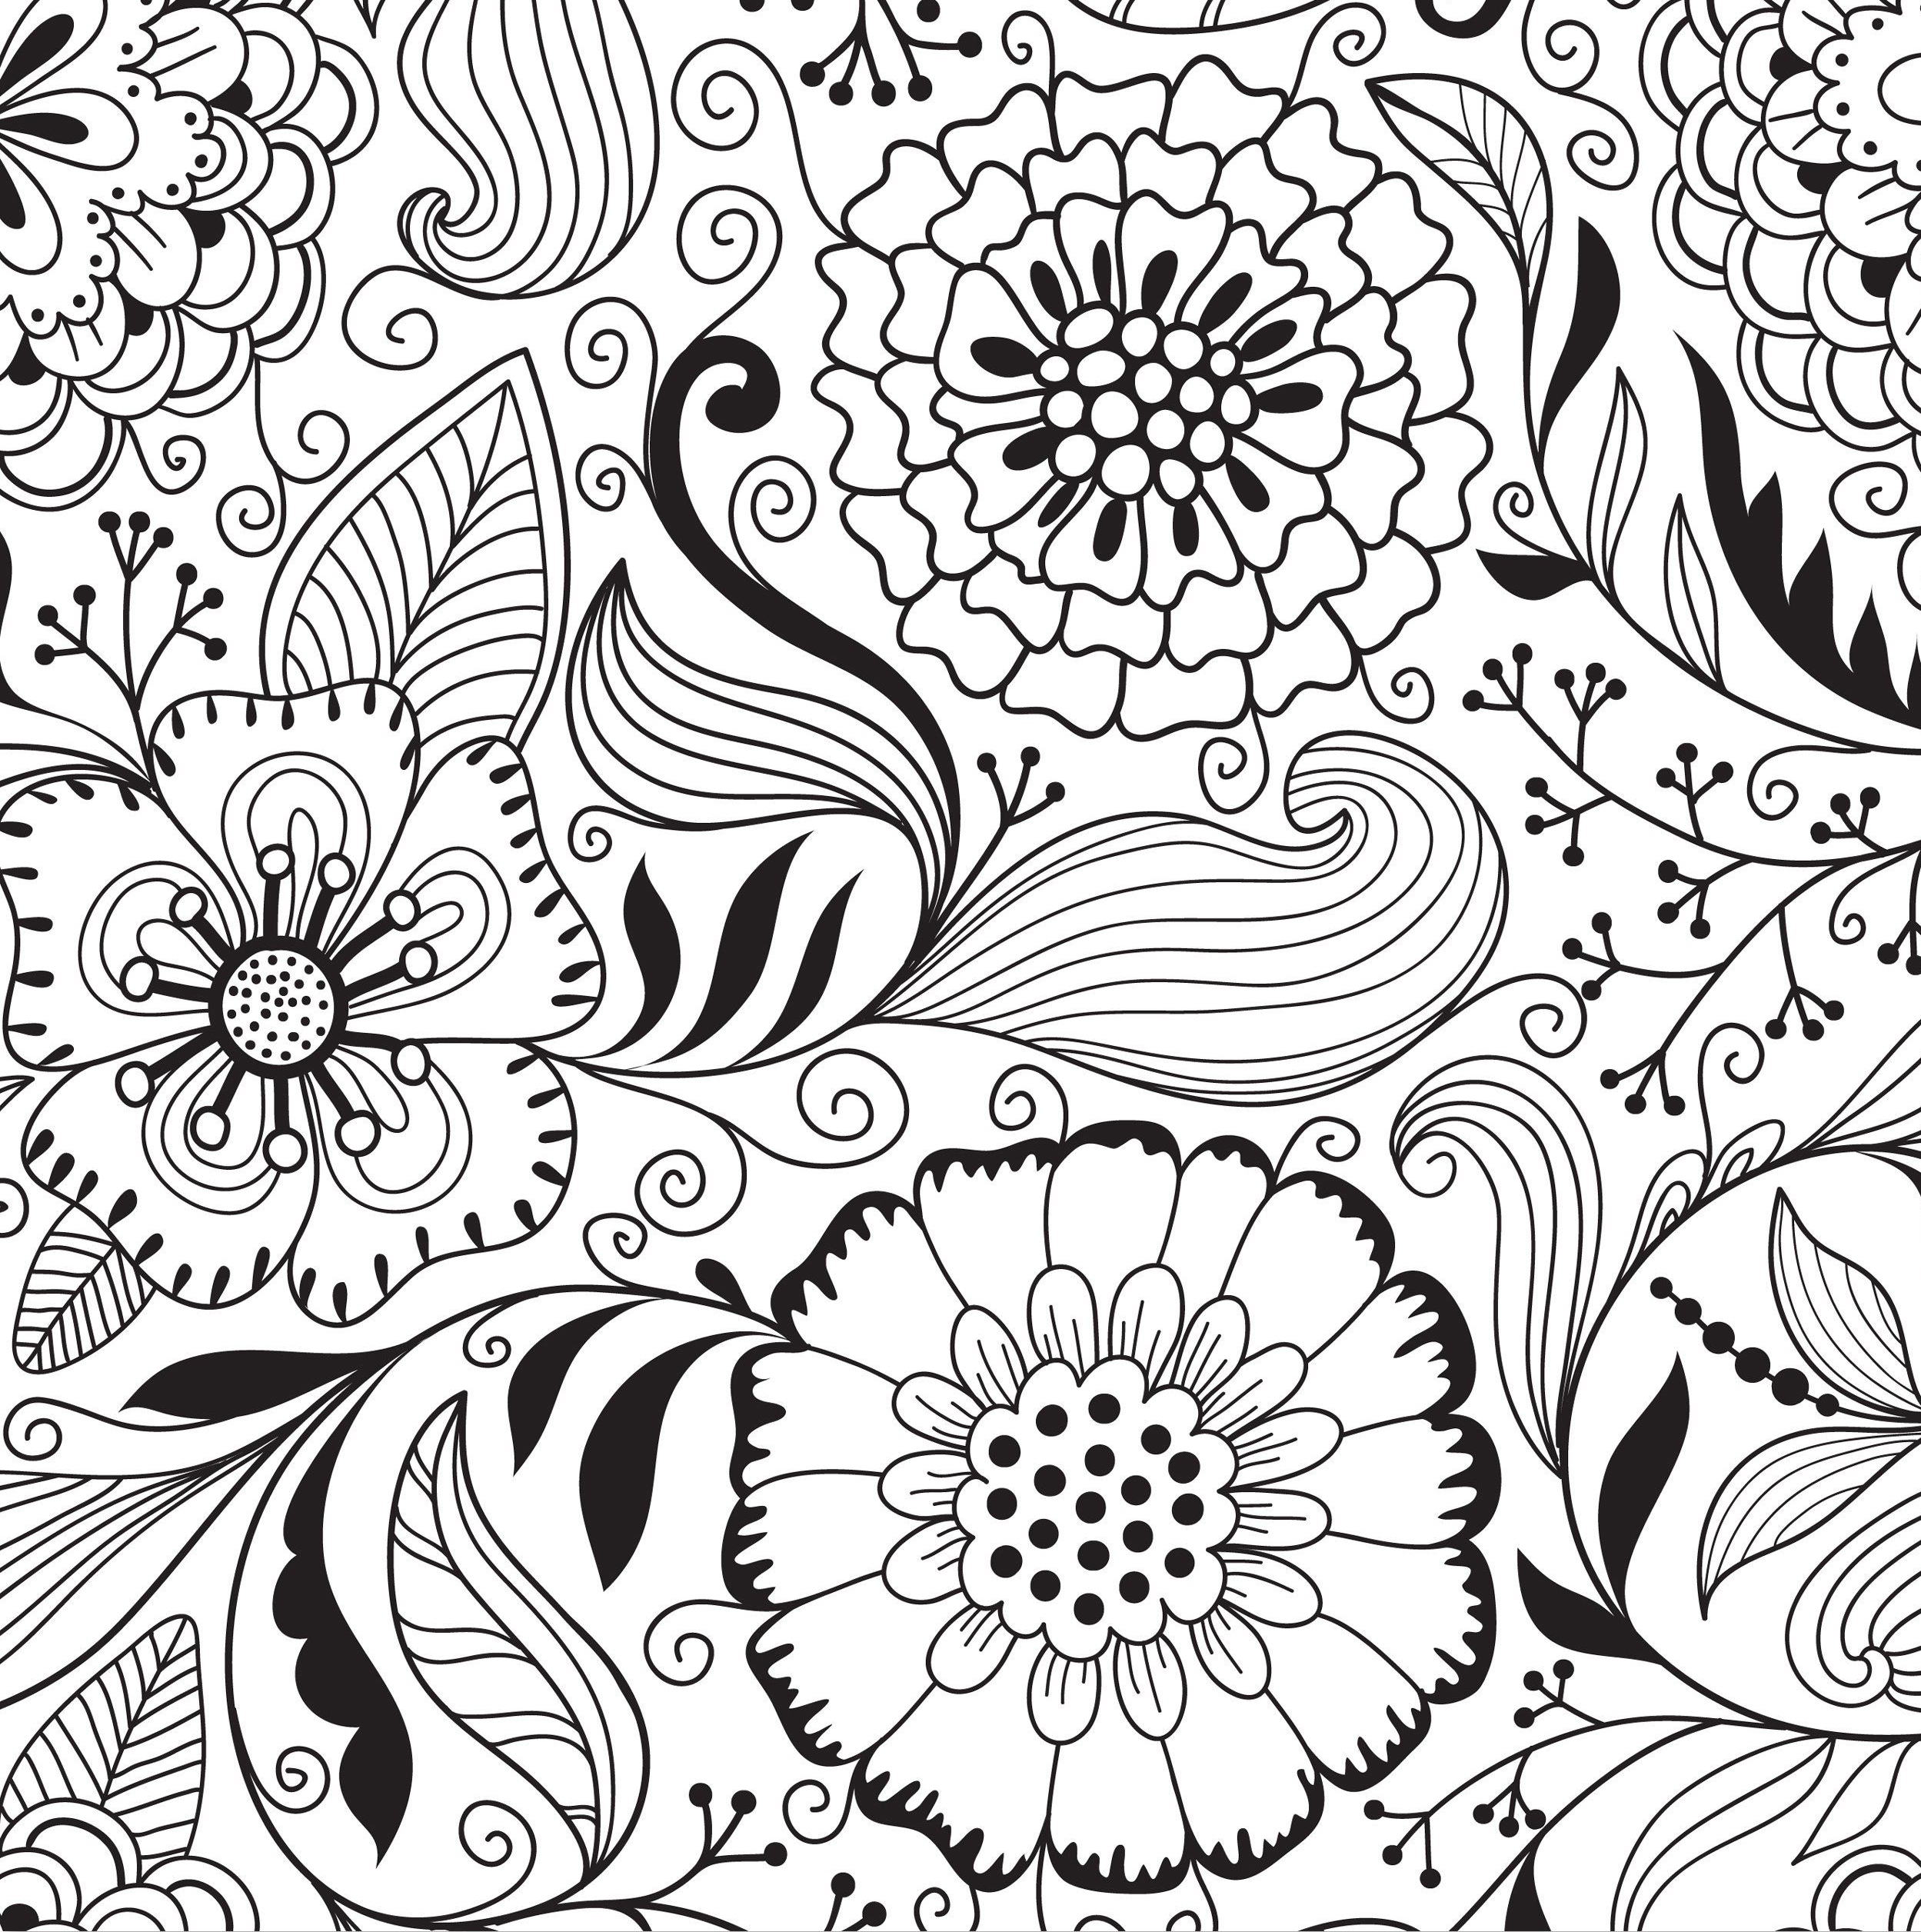 880 Simple Pattern Coloring Pages For Kids for Kindergarten